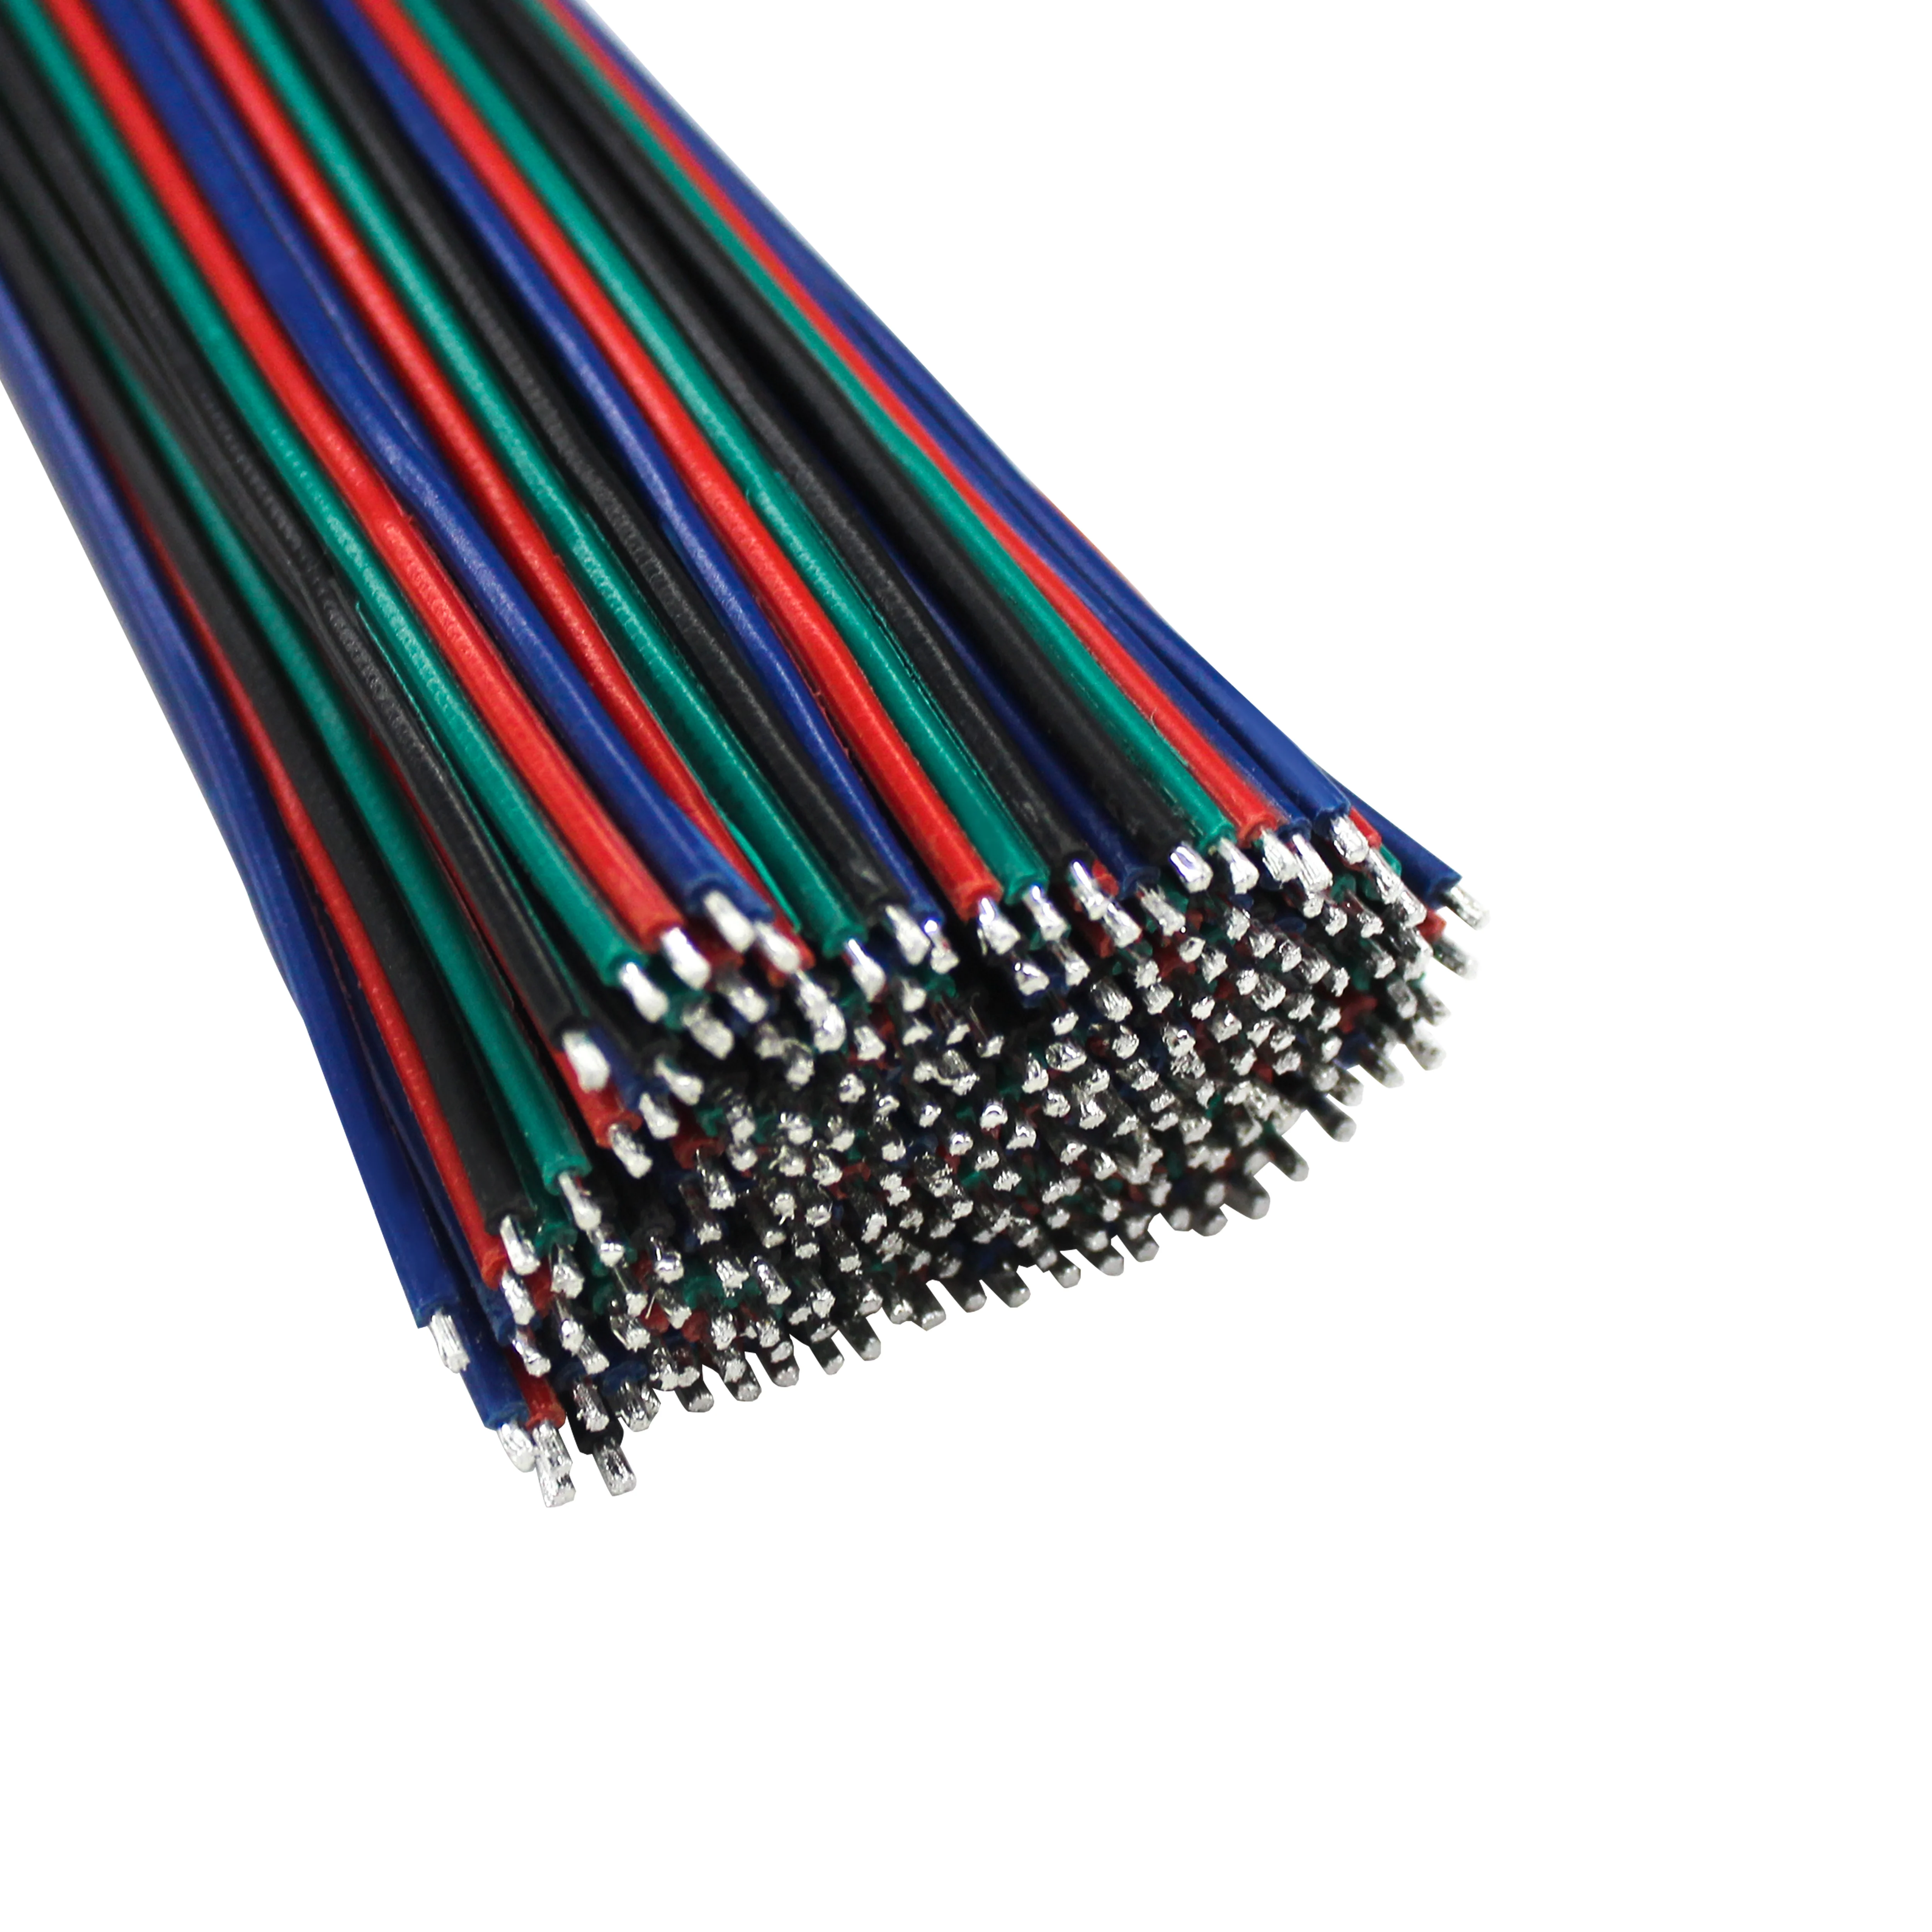 
H05VV-F Copper Wire Cable for RGB led strip light 3 colors Core #18 #20 #22 AWG Electrical Cable Wire 